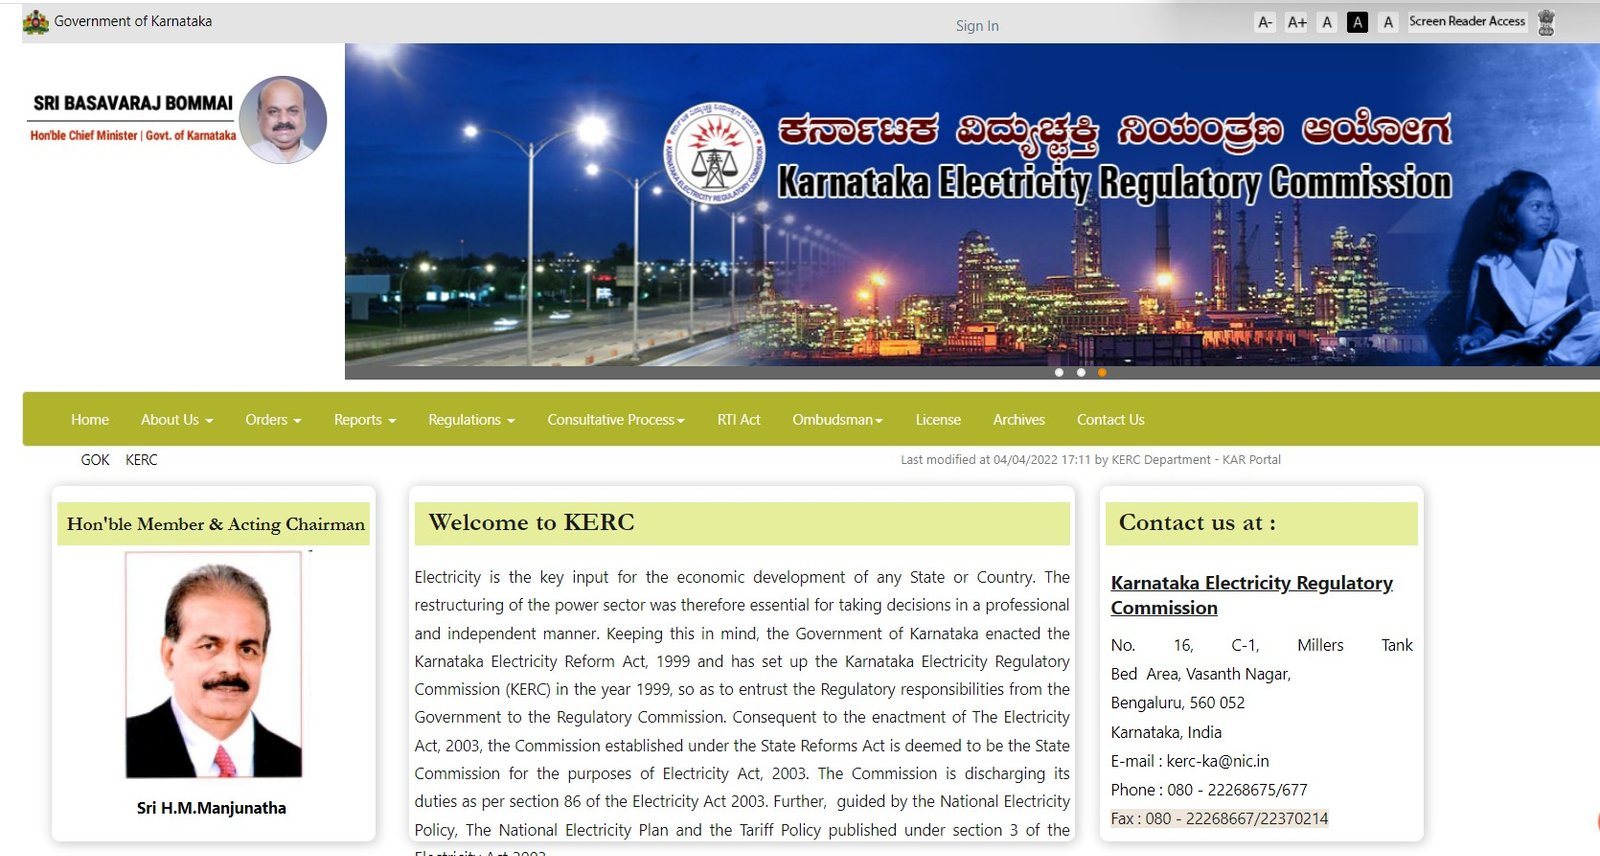 KERC approves increase of energy charges by 5 paise per unit